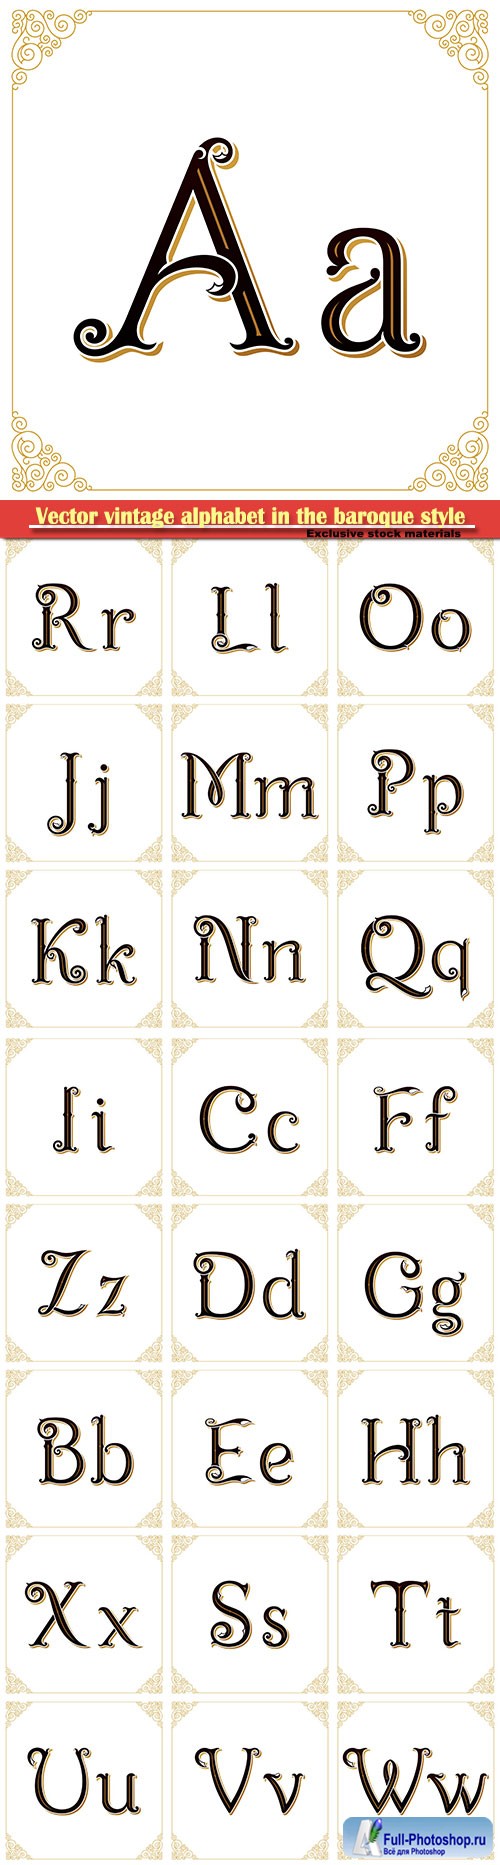 Vector vintage alphabet in the baroque style